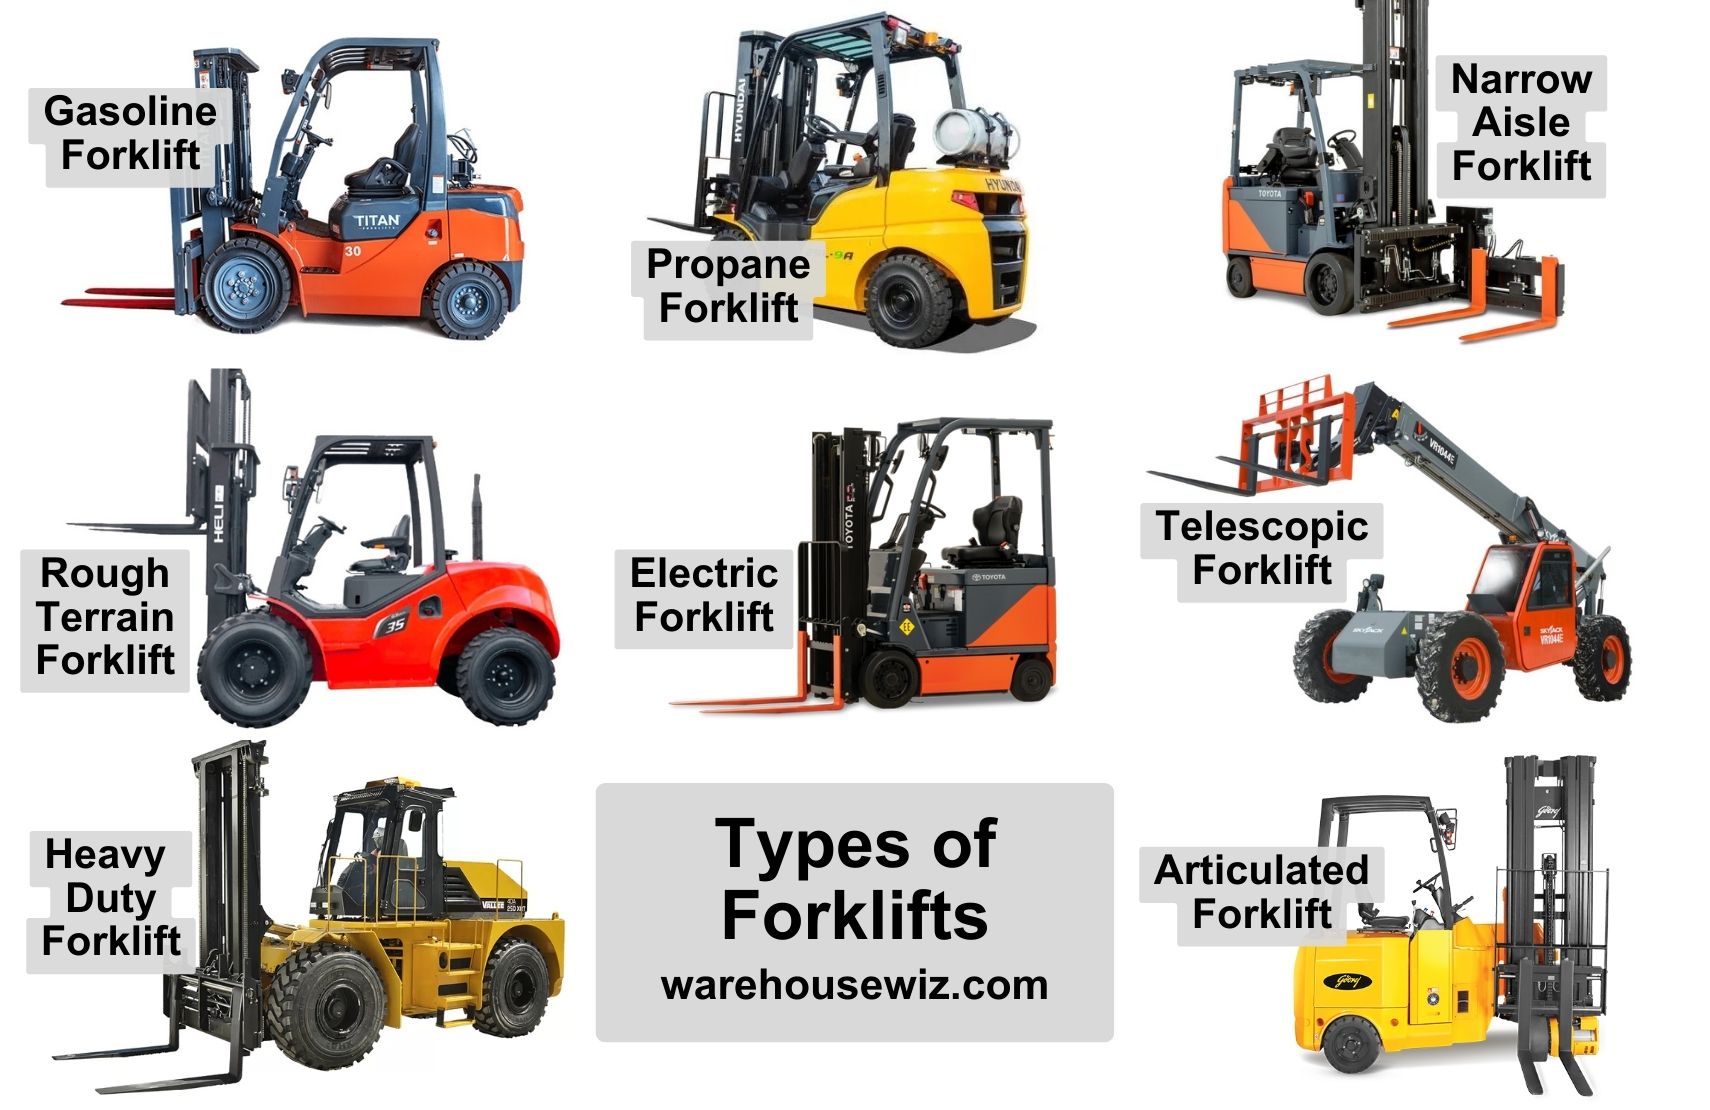 13 Types of Forklifts And What They're Used For#N# – WAREHOUSEWIZ